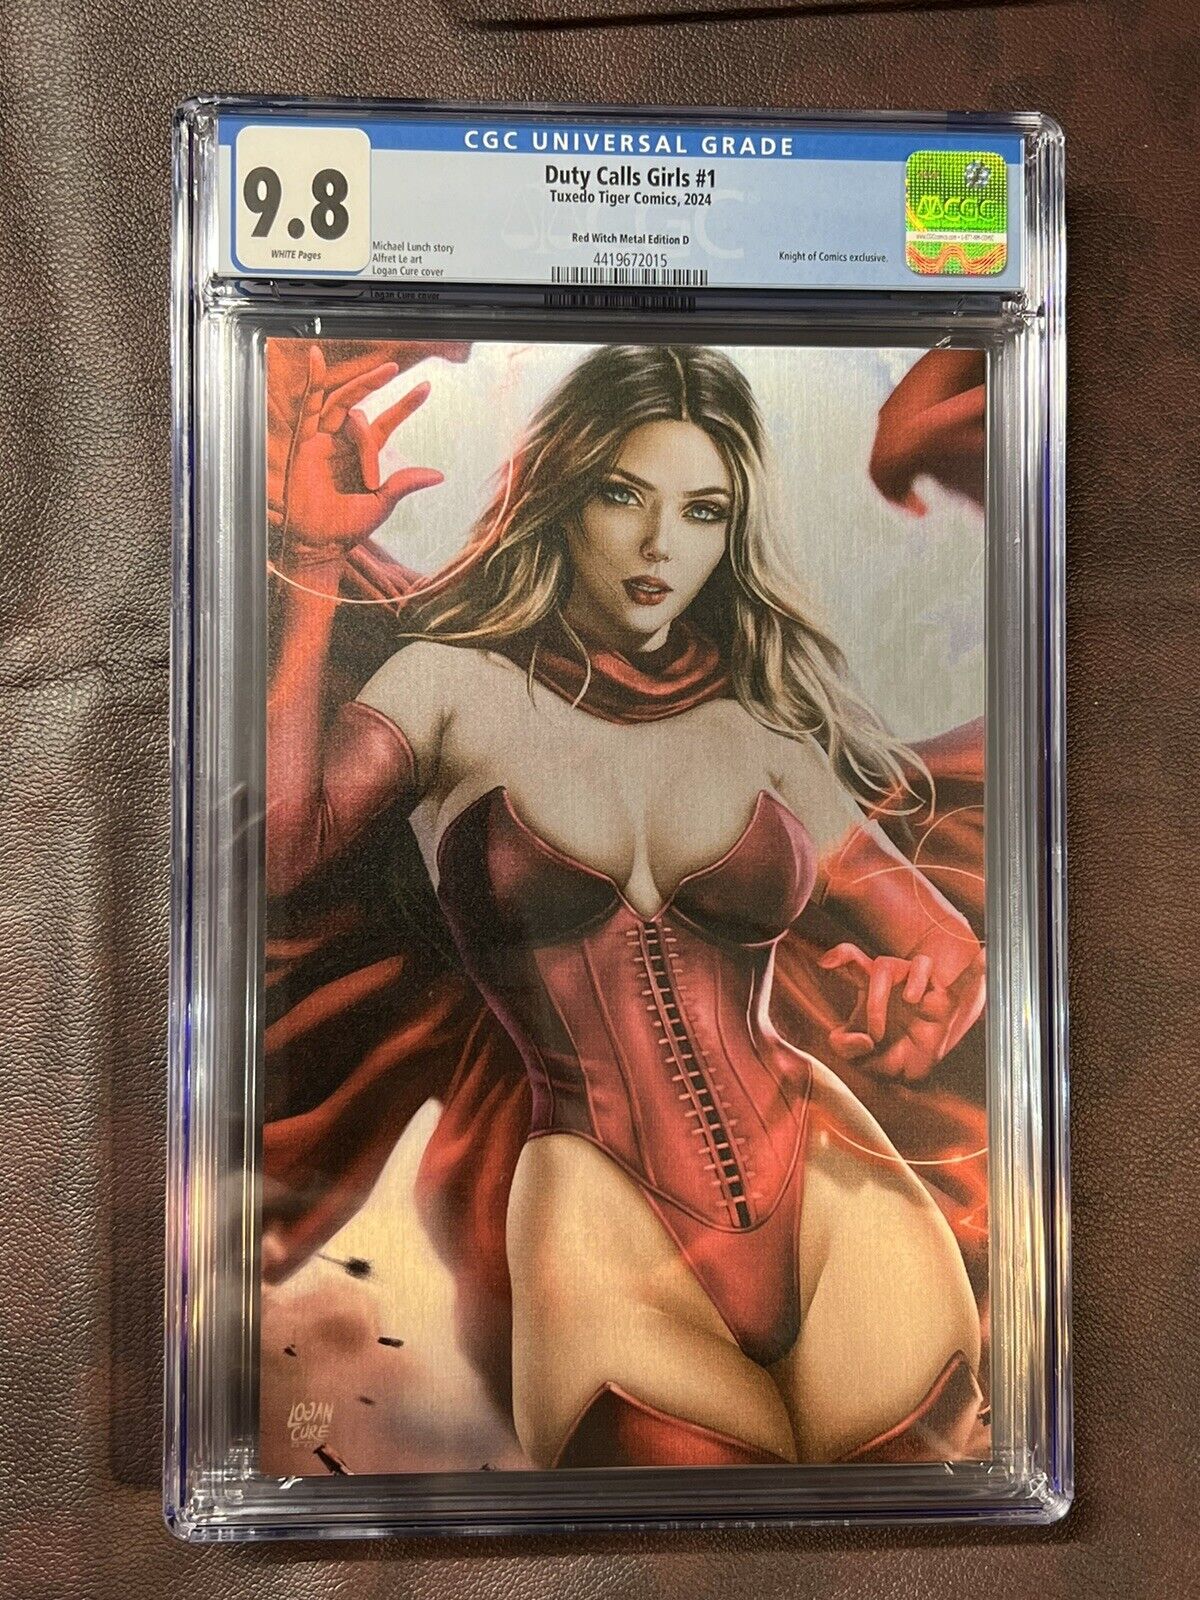 Duty Calls Girls Scarlet Witch Logan Cure Knight Metal Exclusive Variant CGC 9.8